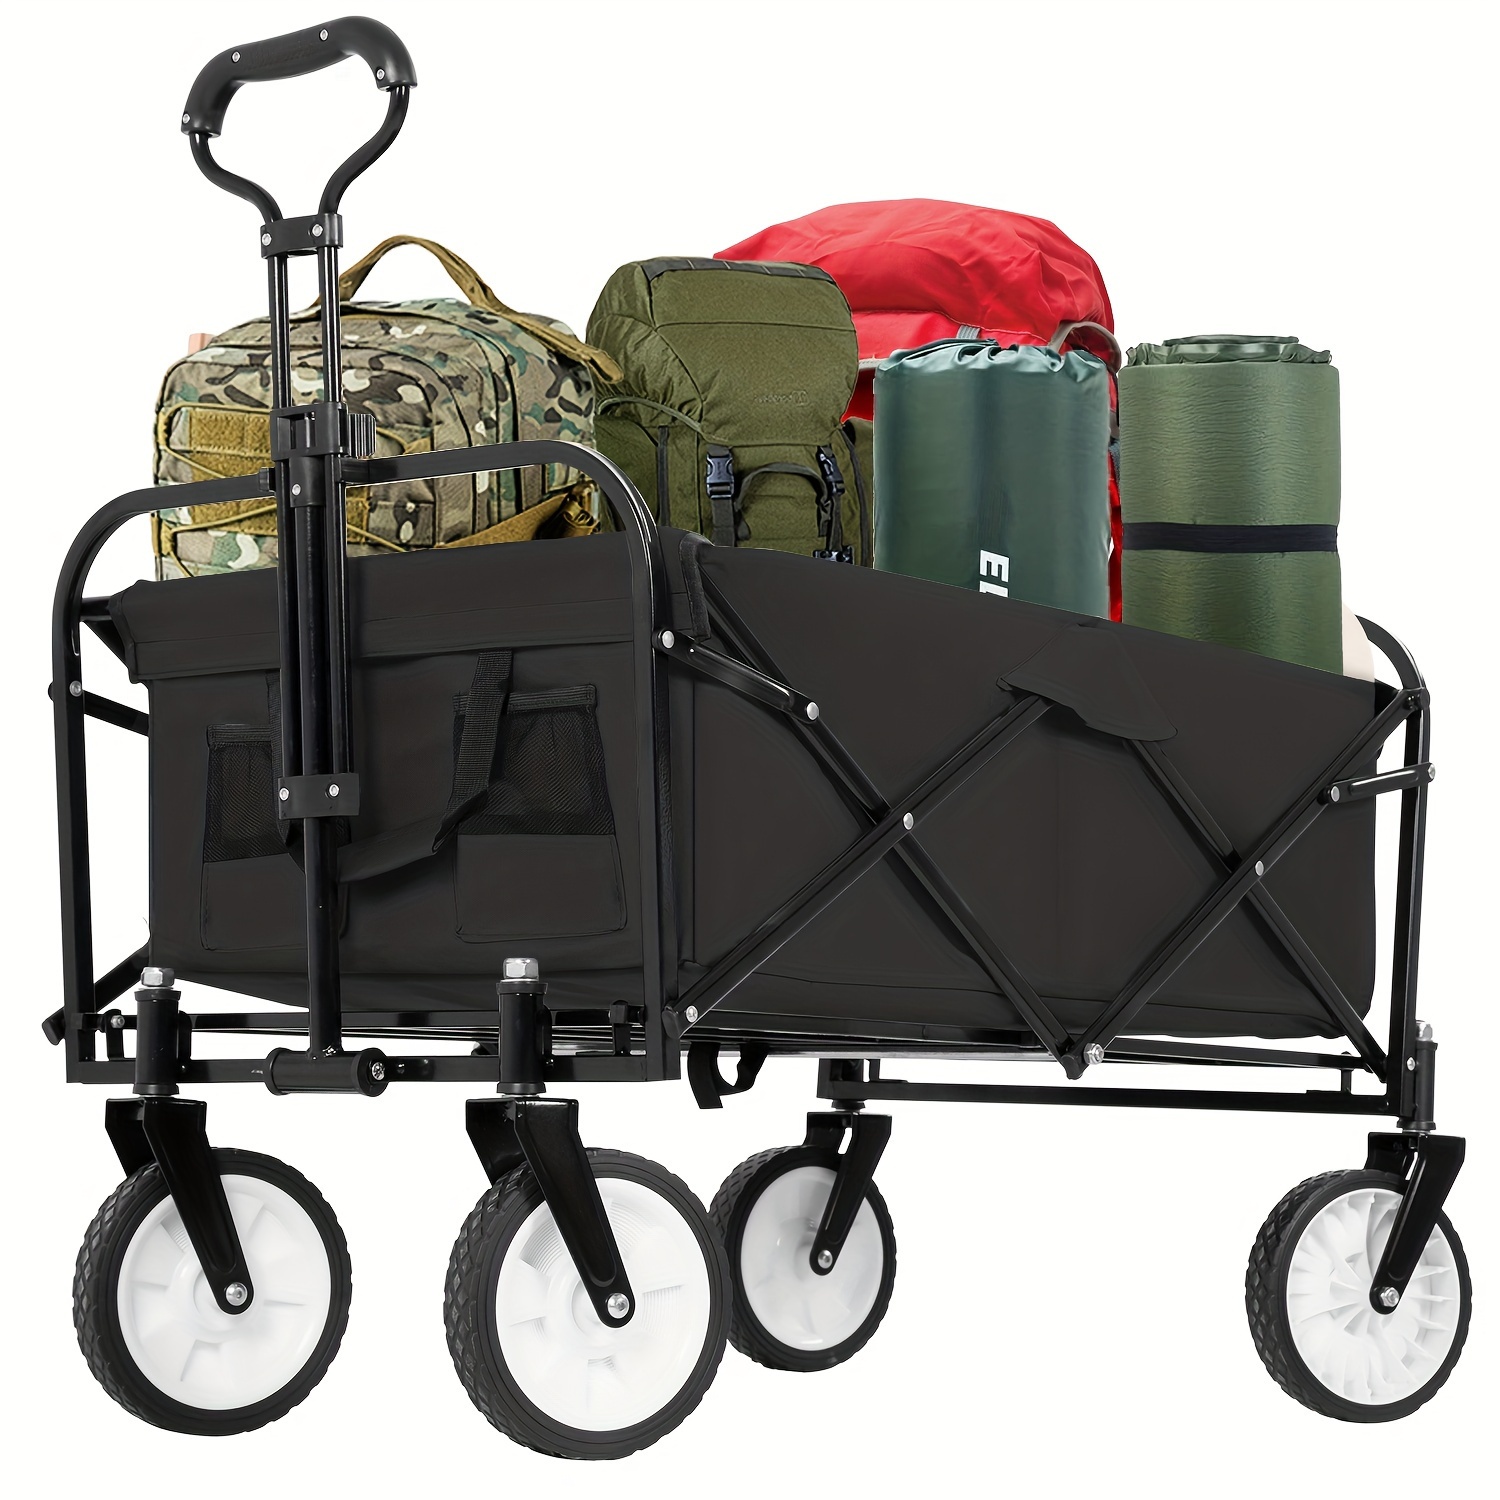 

35"collapsible Wagon Cart Folding Foldable Garden Cart With Large Capacity, Capacity Portable Utility Wagon Cart Heavy Duty For Beach Camping